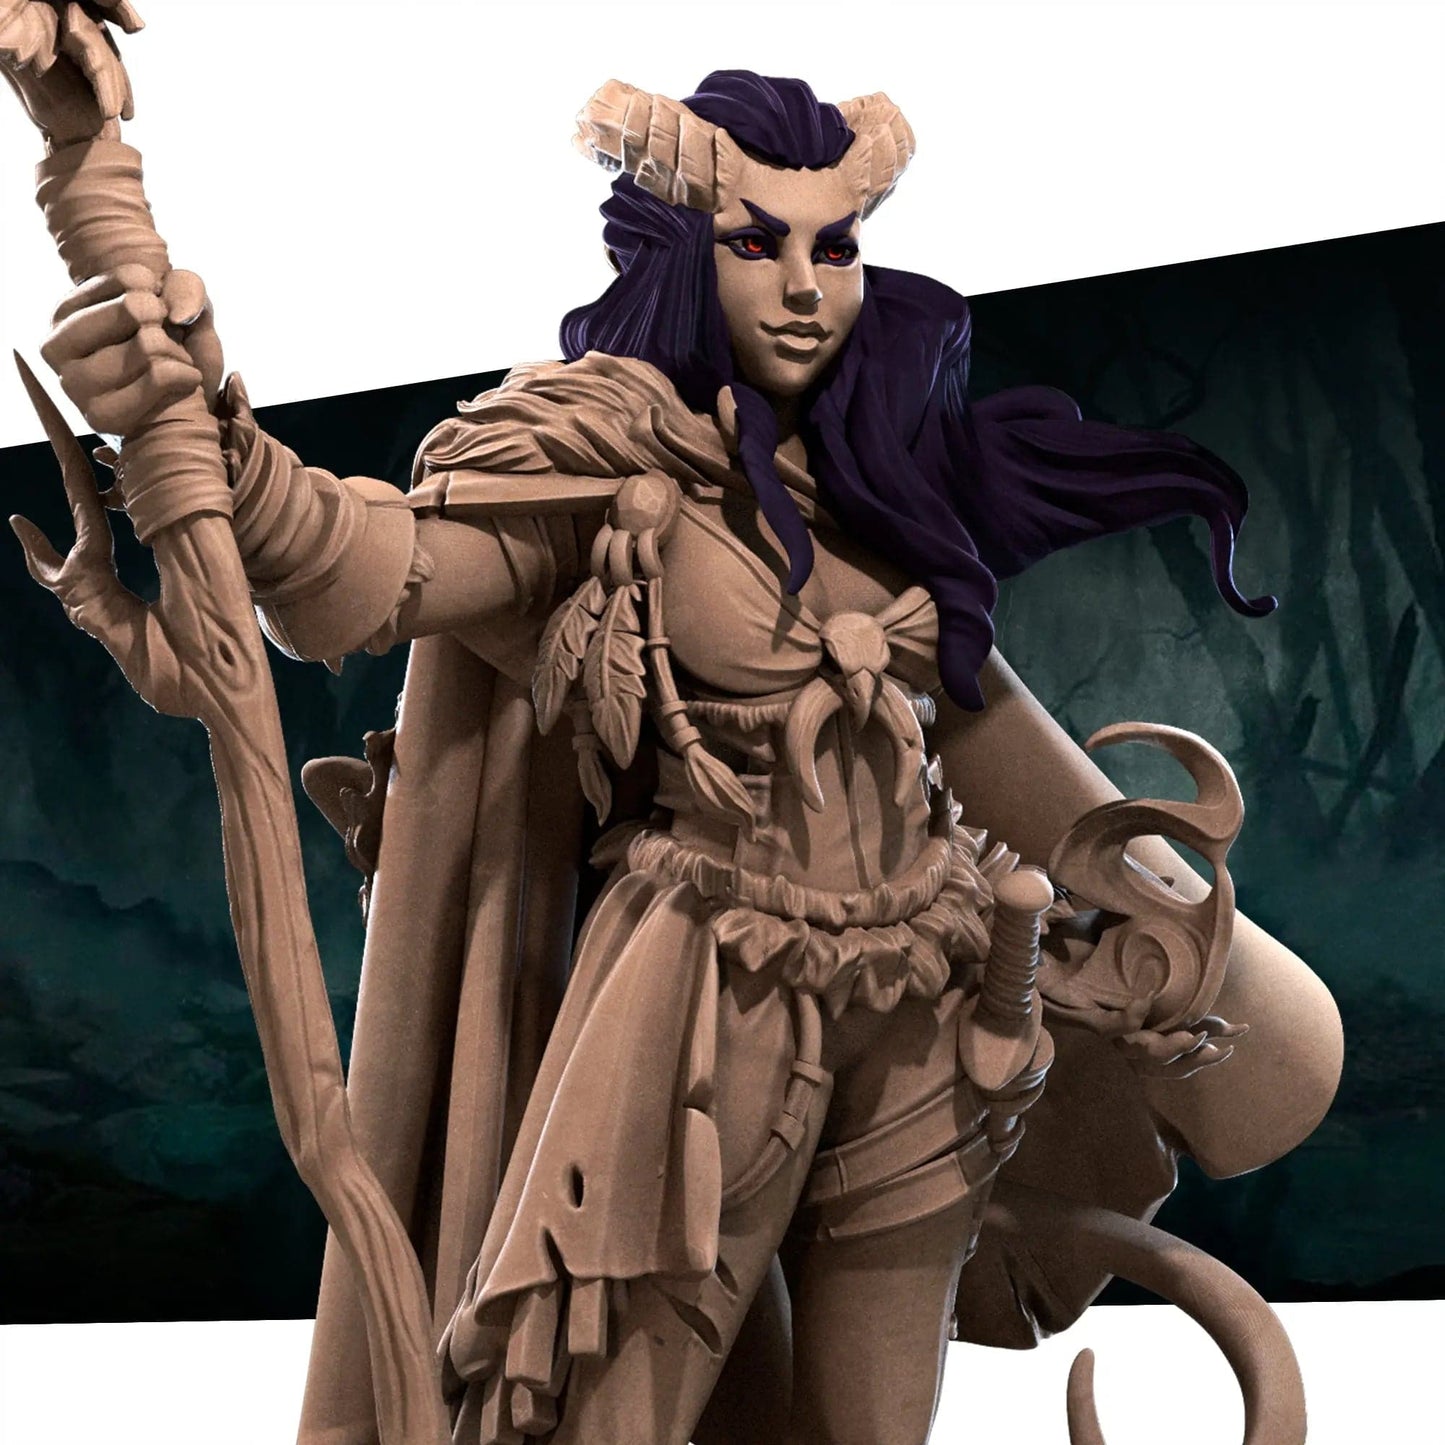 Tiefling Druid with Spear or Staff | D&D Miniature TTRPG Character | Bite the Bullet - Tattles Told 3D